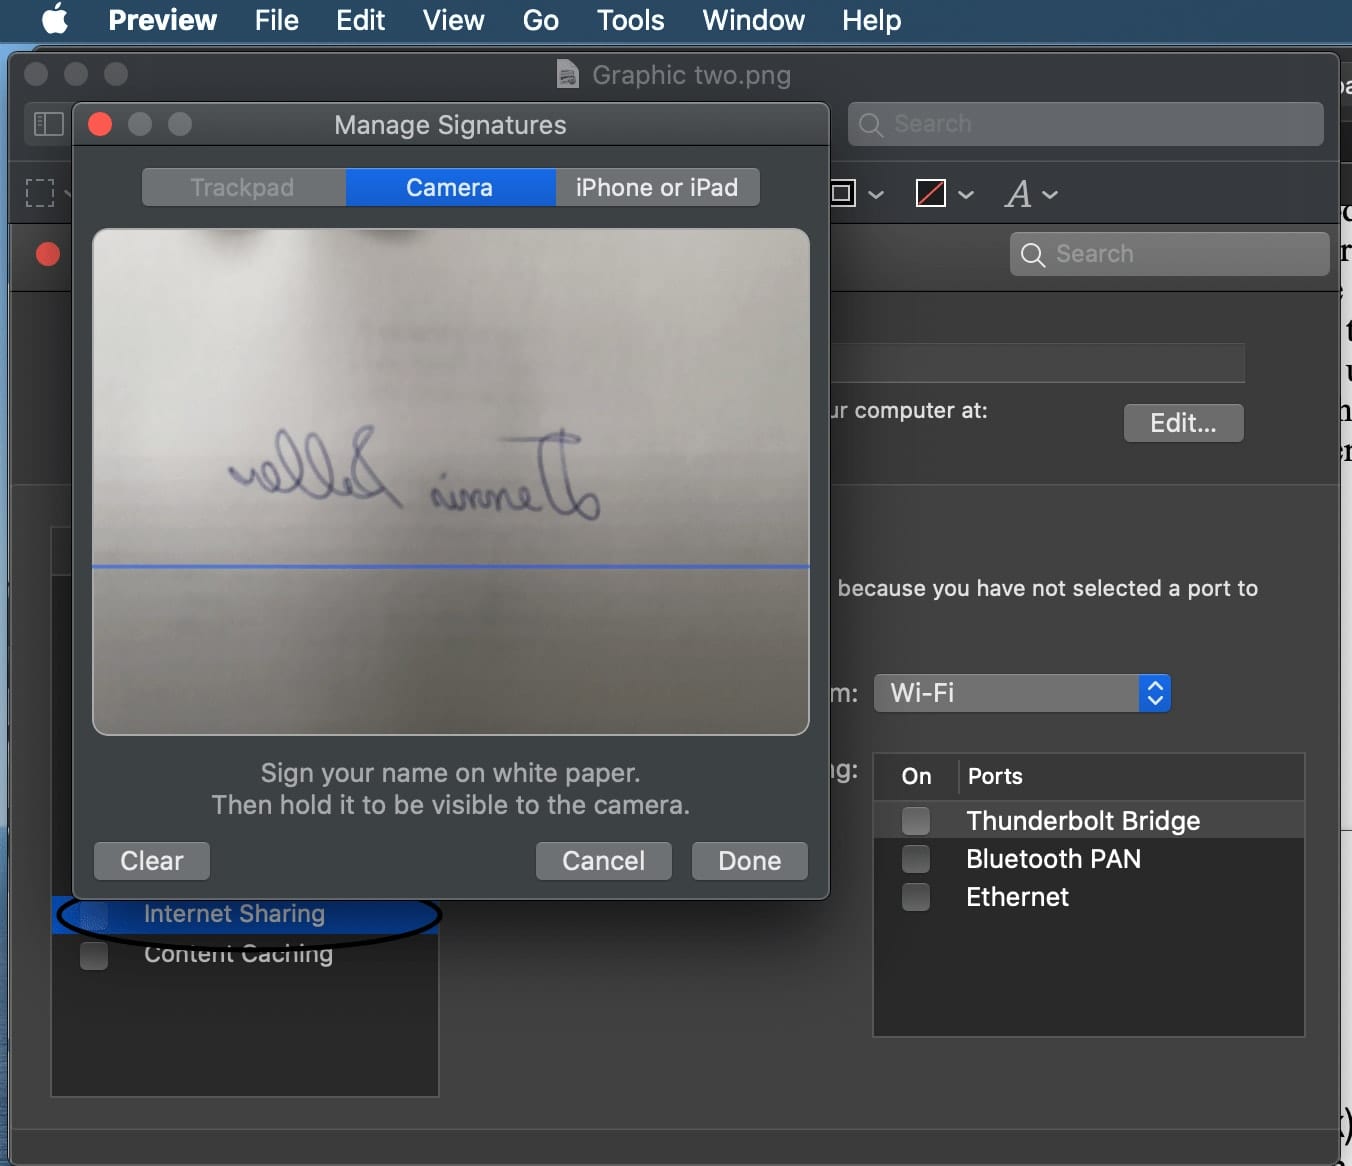 Preview can be used to create digital signatures